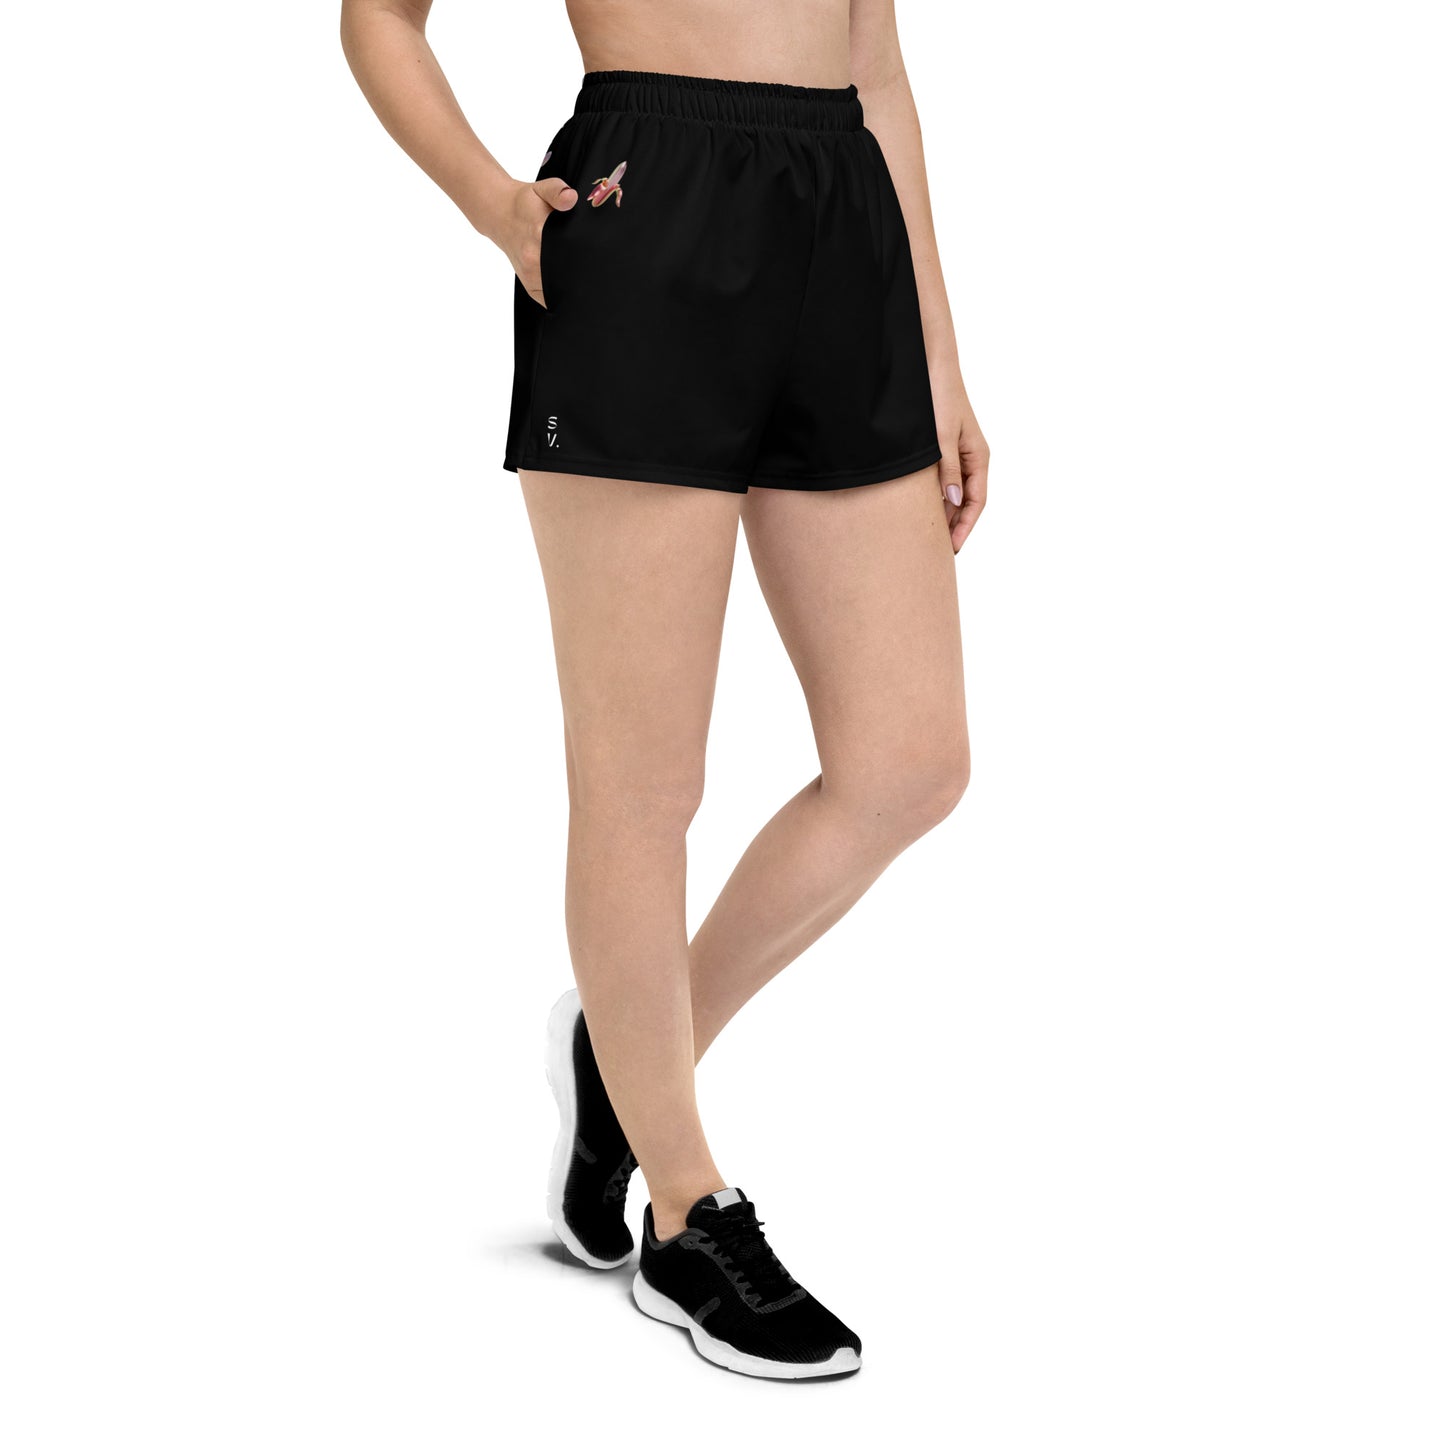 [Bananza] - Women’s (Recycled) Athletic Shorts